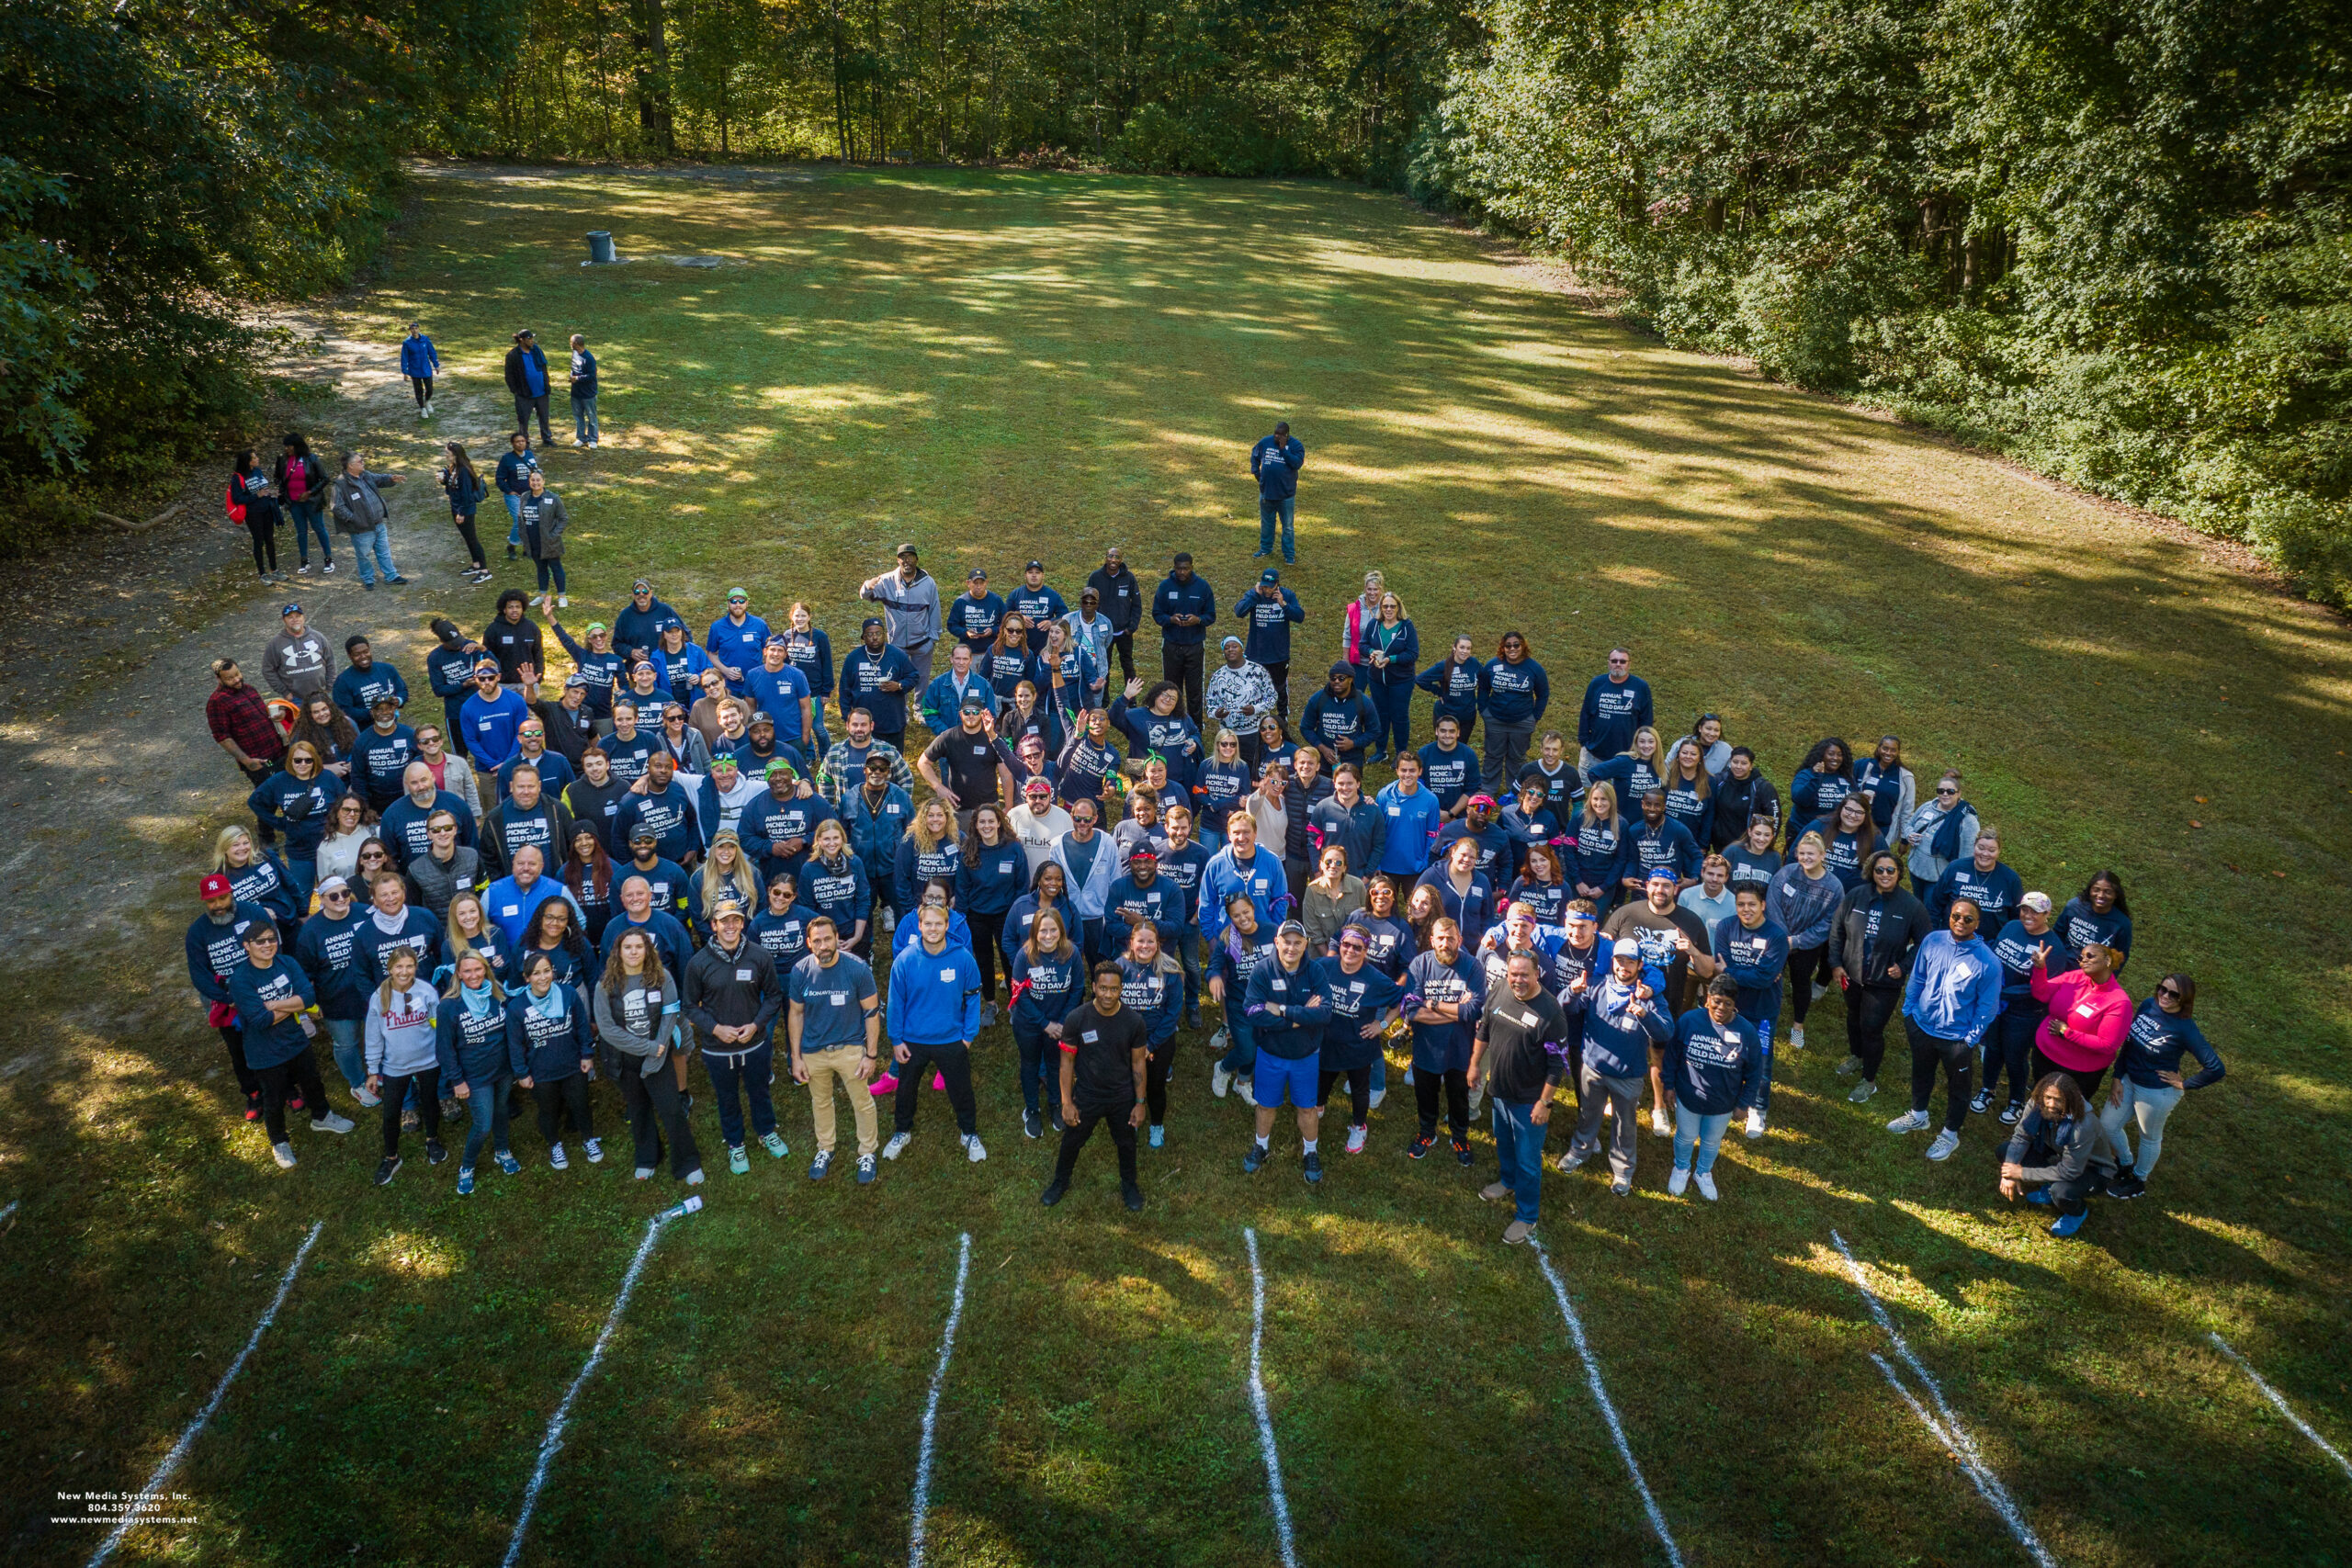 Overhead drone shot of group of people standing in grass